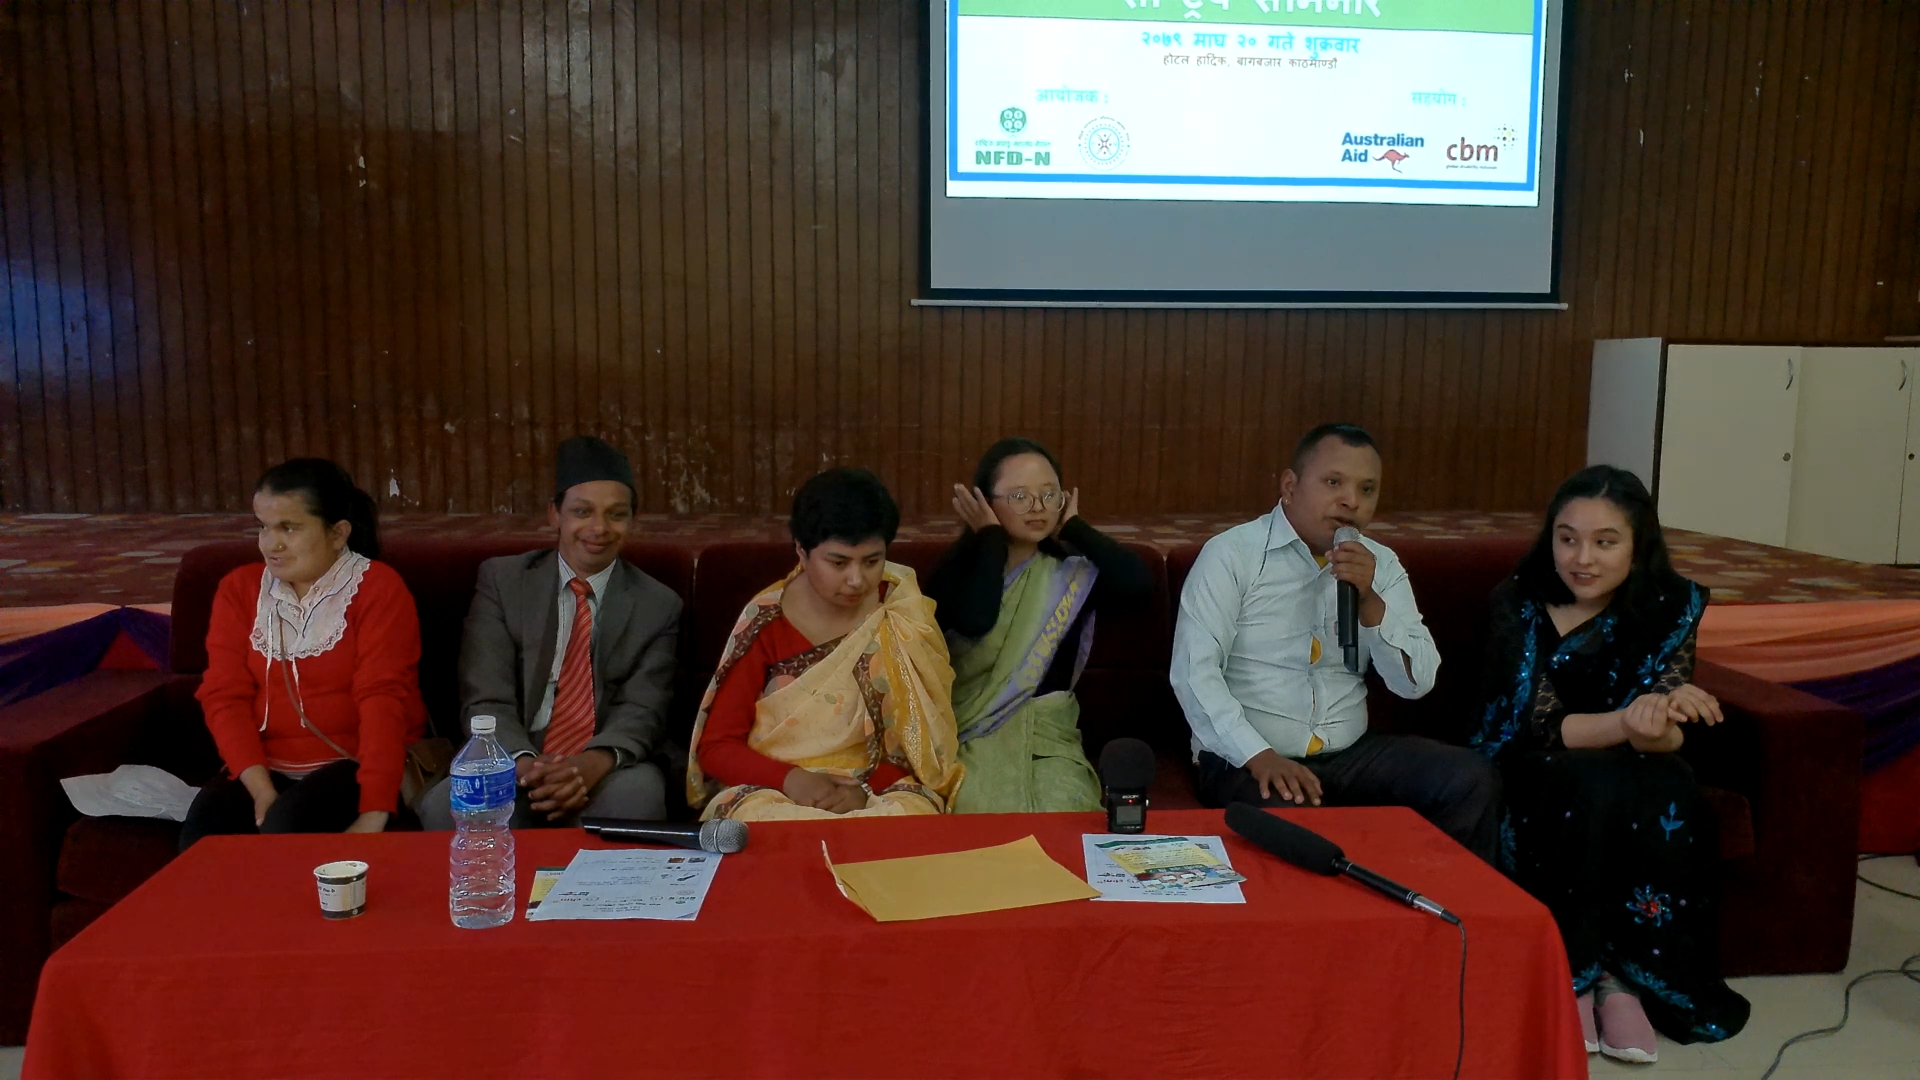 Self-advocates from the left Ms. Shanti phuyal, Nischal K.C, Ayushma Manandhar, Luja Shrestha, Shiva Shrestha, Prasansha Shakya are sitting in a chair in a hall. Shiva Shrestha can be seen as holding mike and responding to the questions.